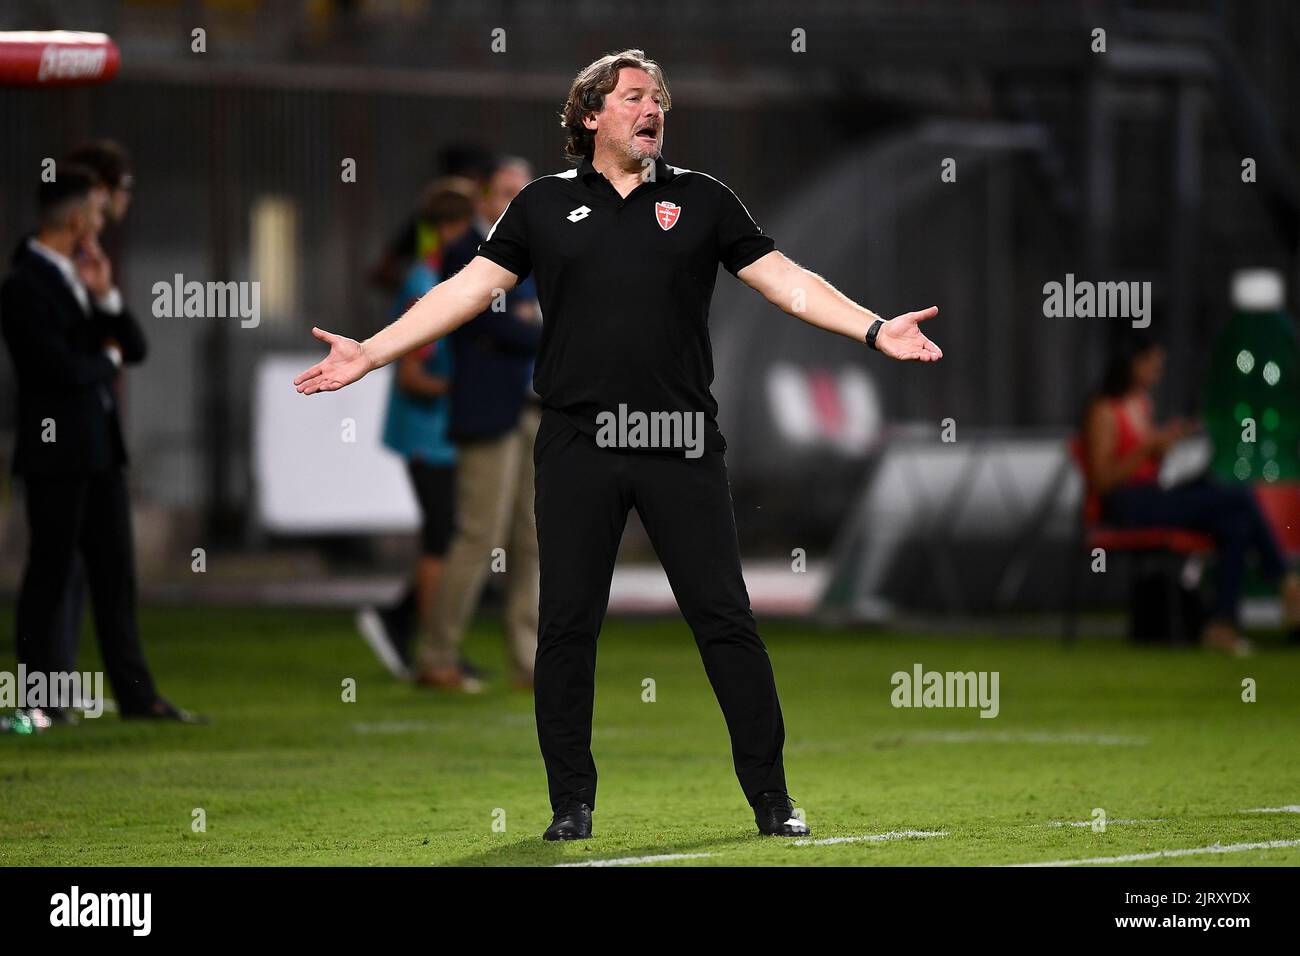 Monza, Italy. 26 August 2022. Giovanni Stroppa, head coach of AC Monza, reacts during the Serie A football match between AC Monza and Udinese Calcio. Credit: Nicolò Campo/Alamy Live News Stock Photo